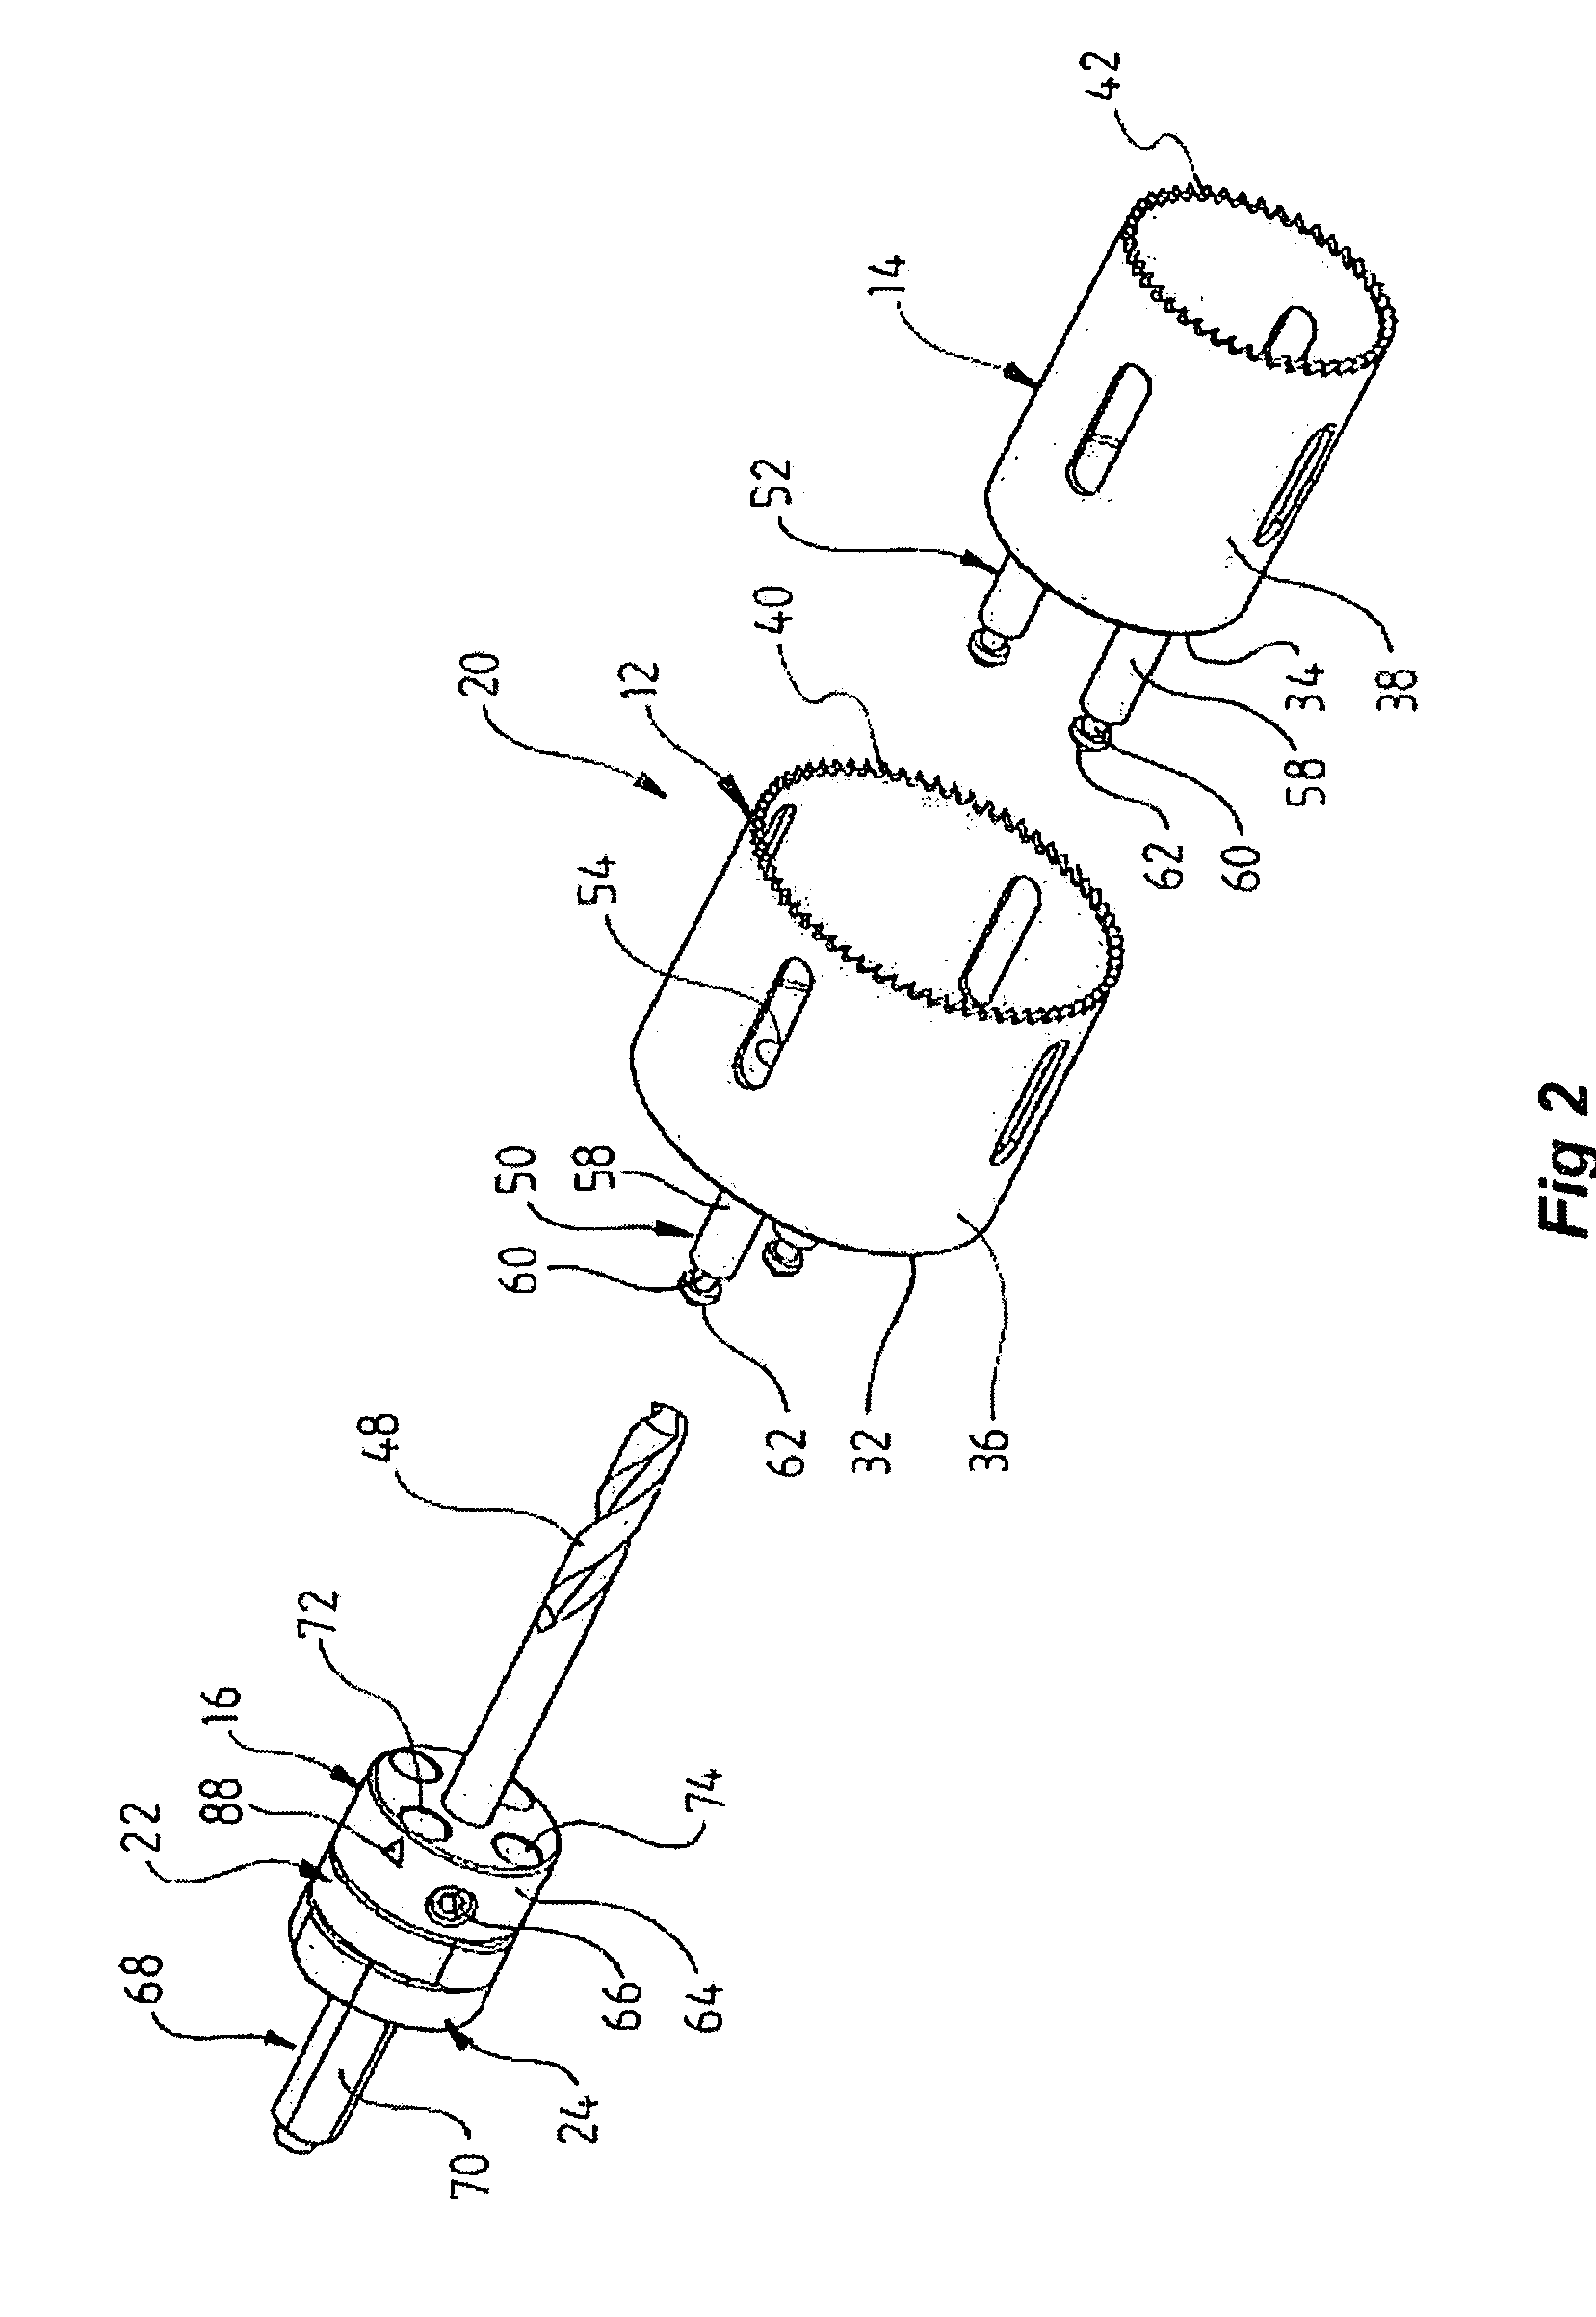 Hole-saw assembly including two hole-saws